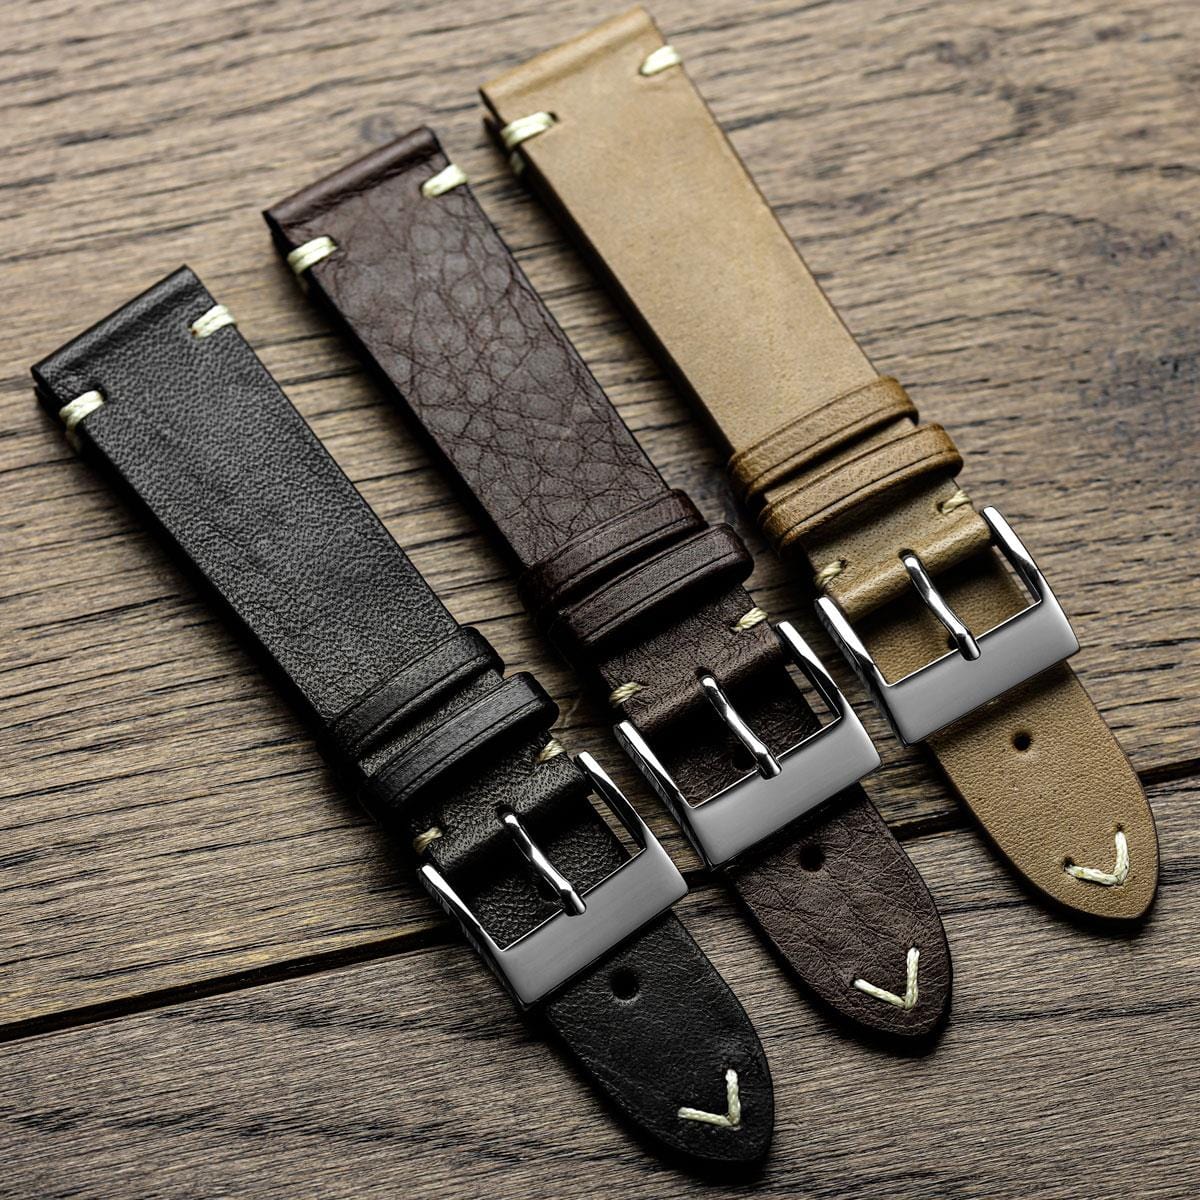 Vintage Cavallo Horse Leather Watch Strap - Chocolate Brown